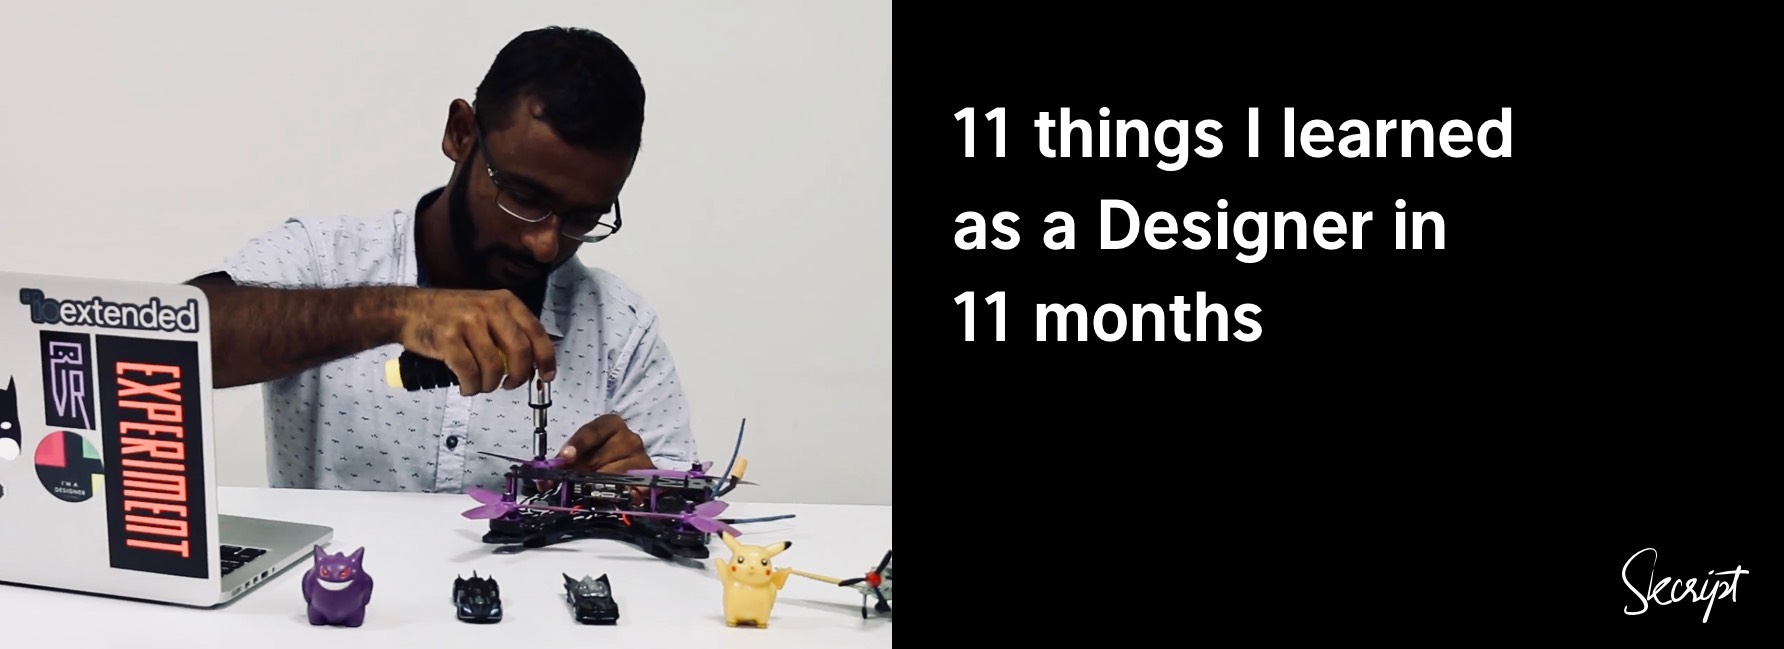 11 things I learned as Designer in 11 months